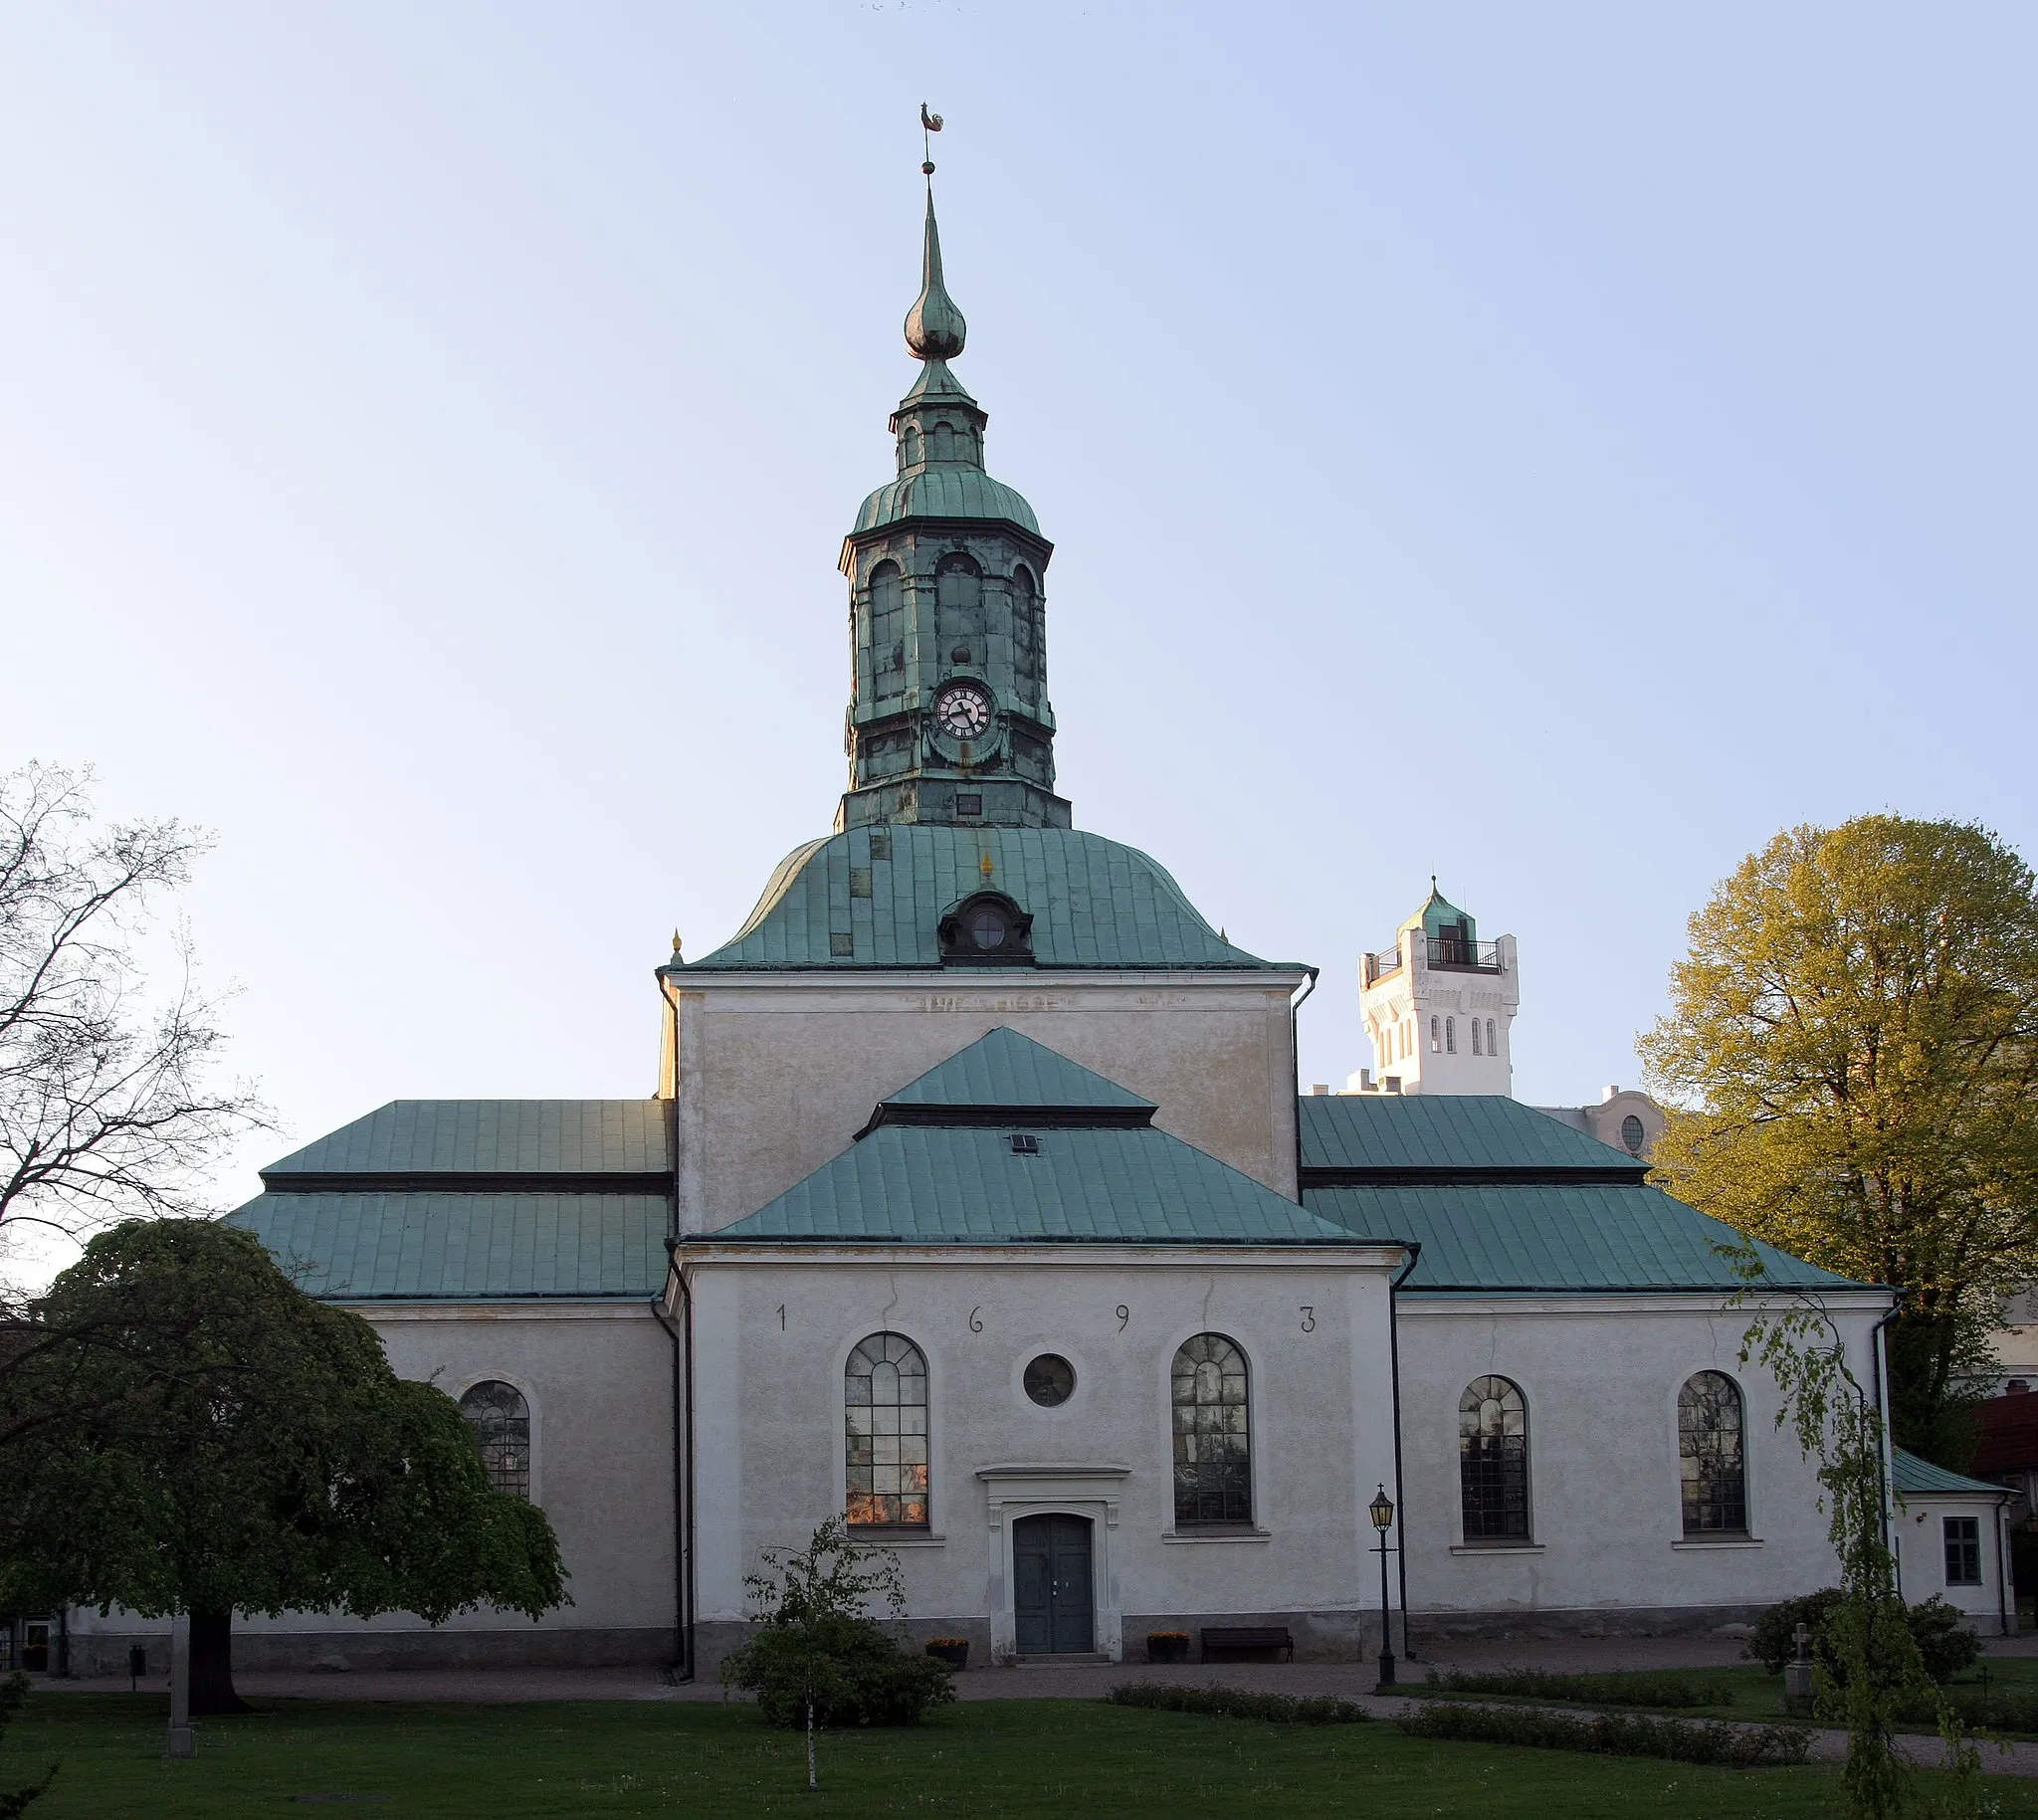 Photo showing: Carl Gustafs kyrka in Karlshamn, Sweden. The image has been assembled from two photos to allow the full building to appear in the picture despite the lack of a wide-angle lens at the time the picture was taken.